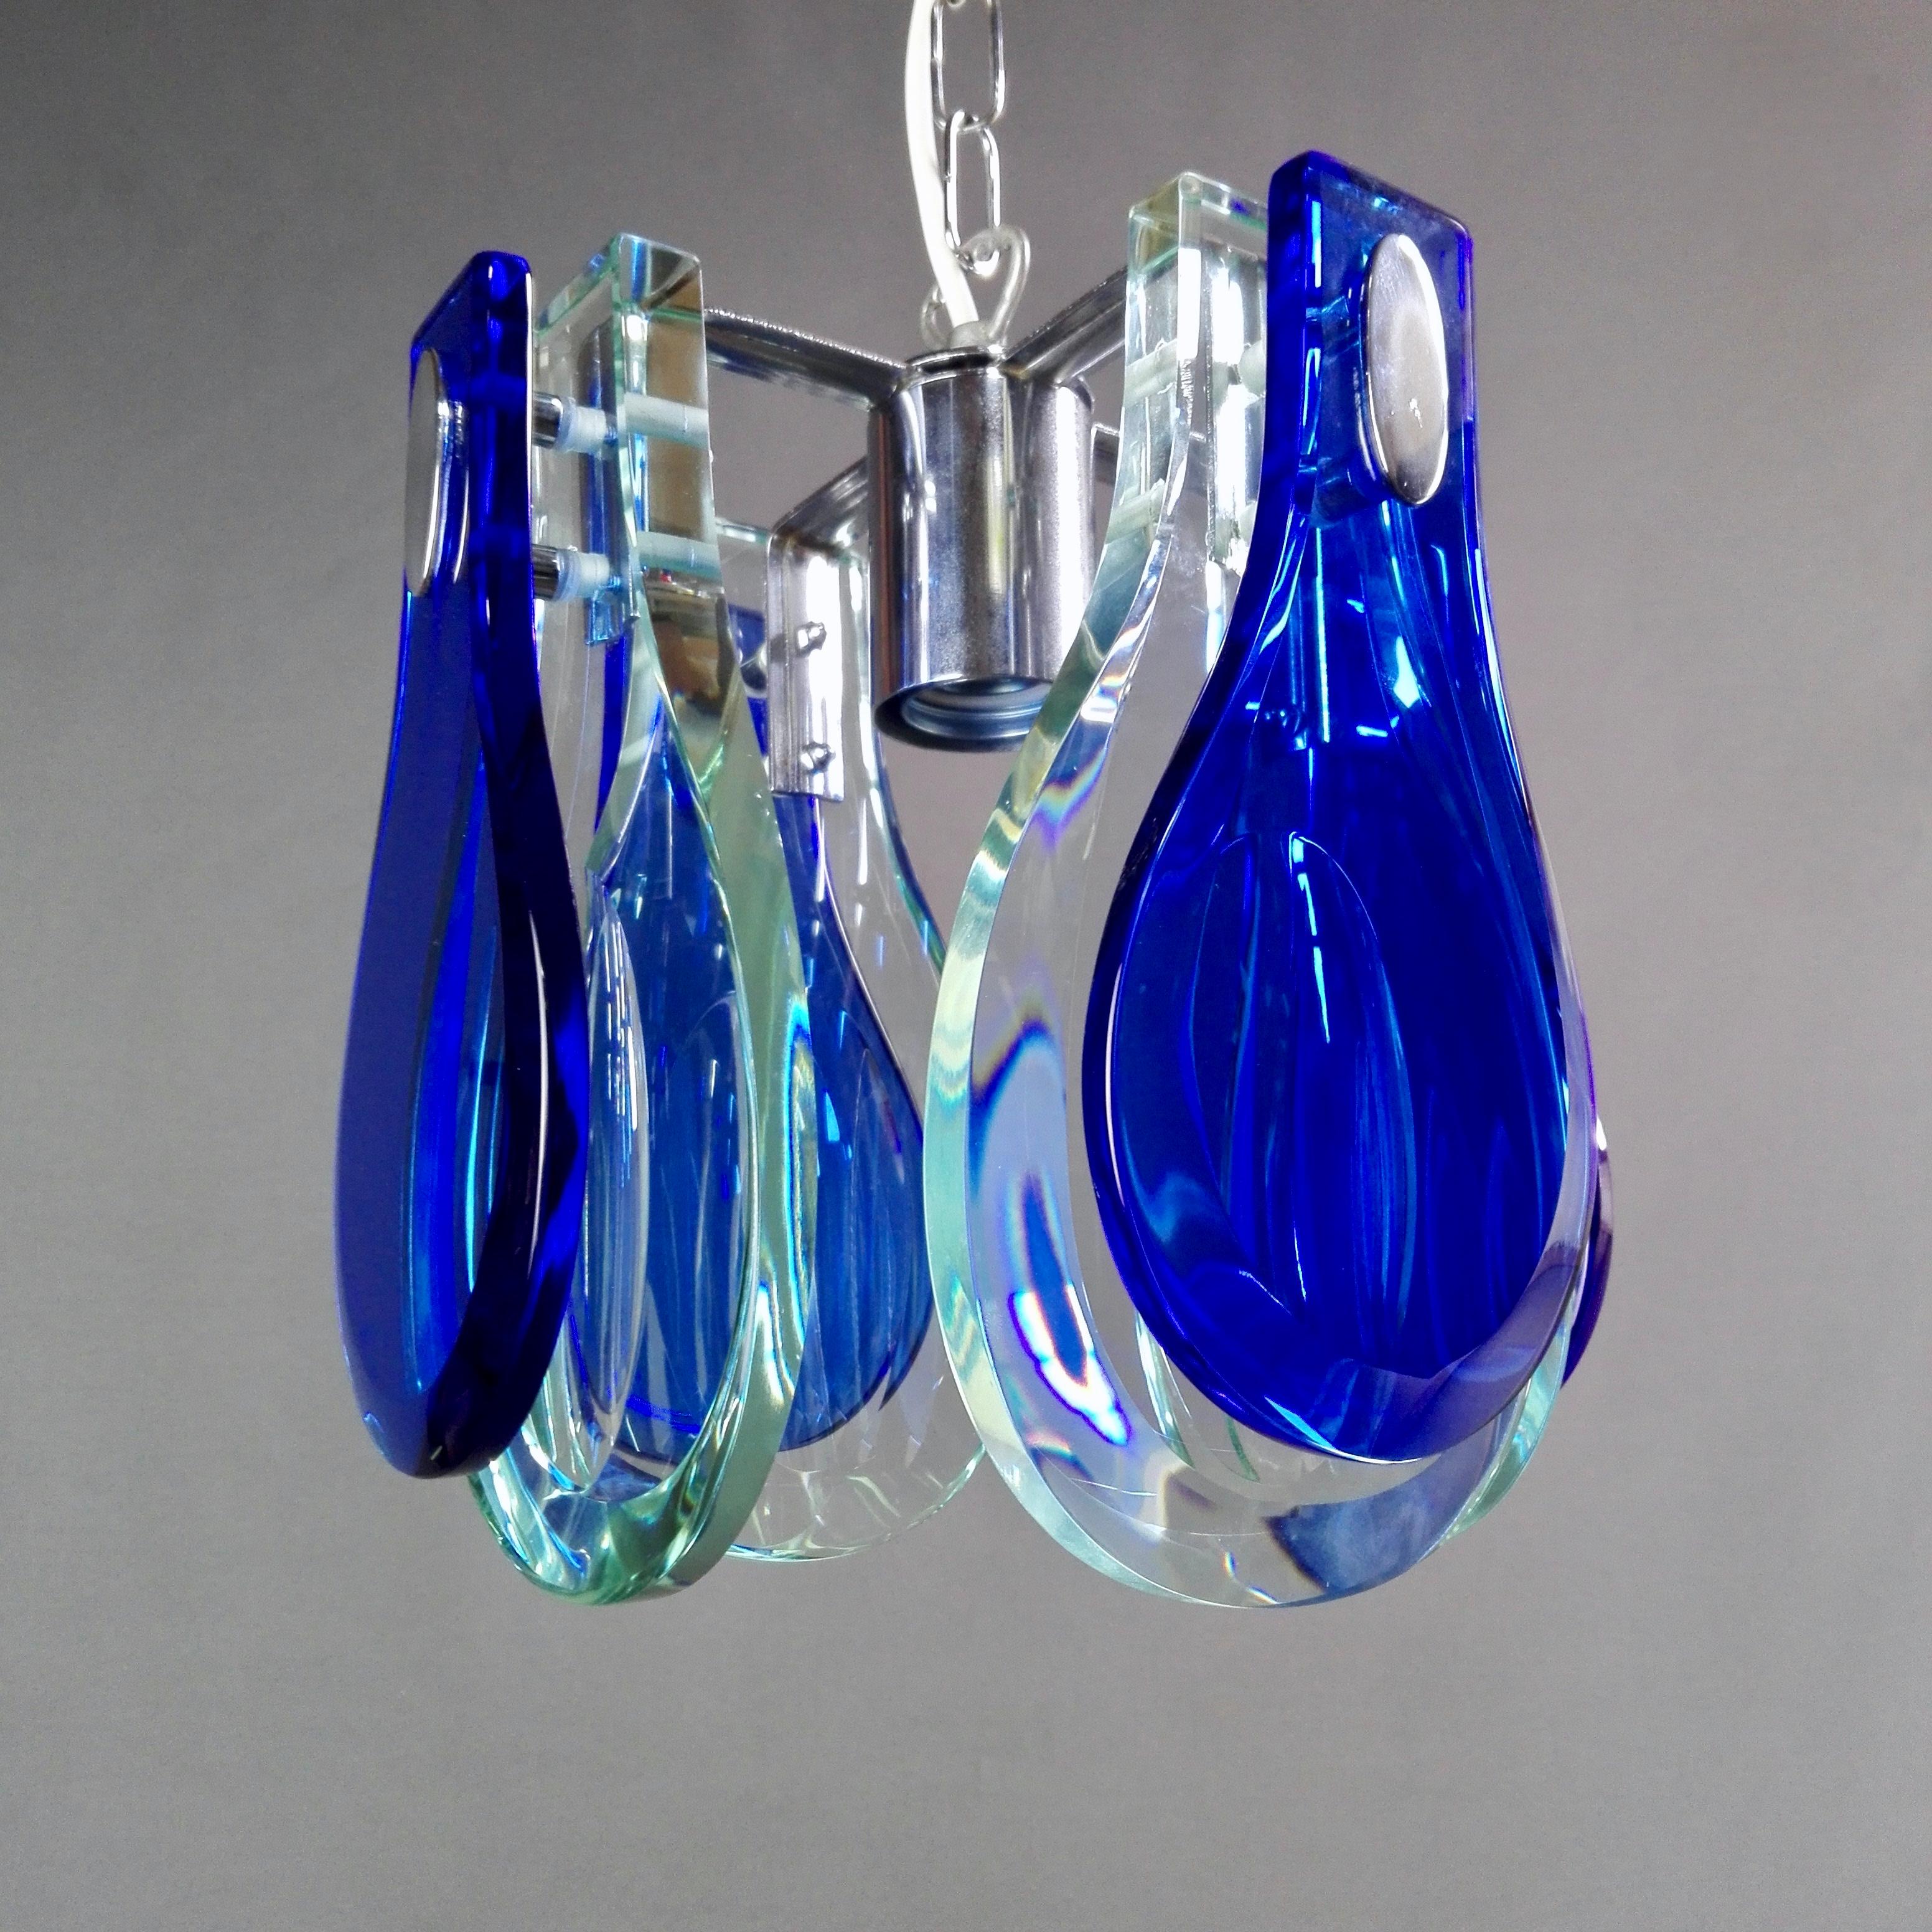 Space Age 1960s Vintage Veca One-Light Ultramarine Blue and Teal Glass Pendant Lamp